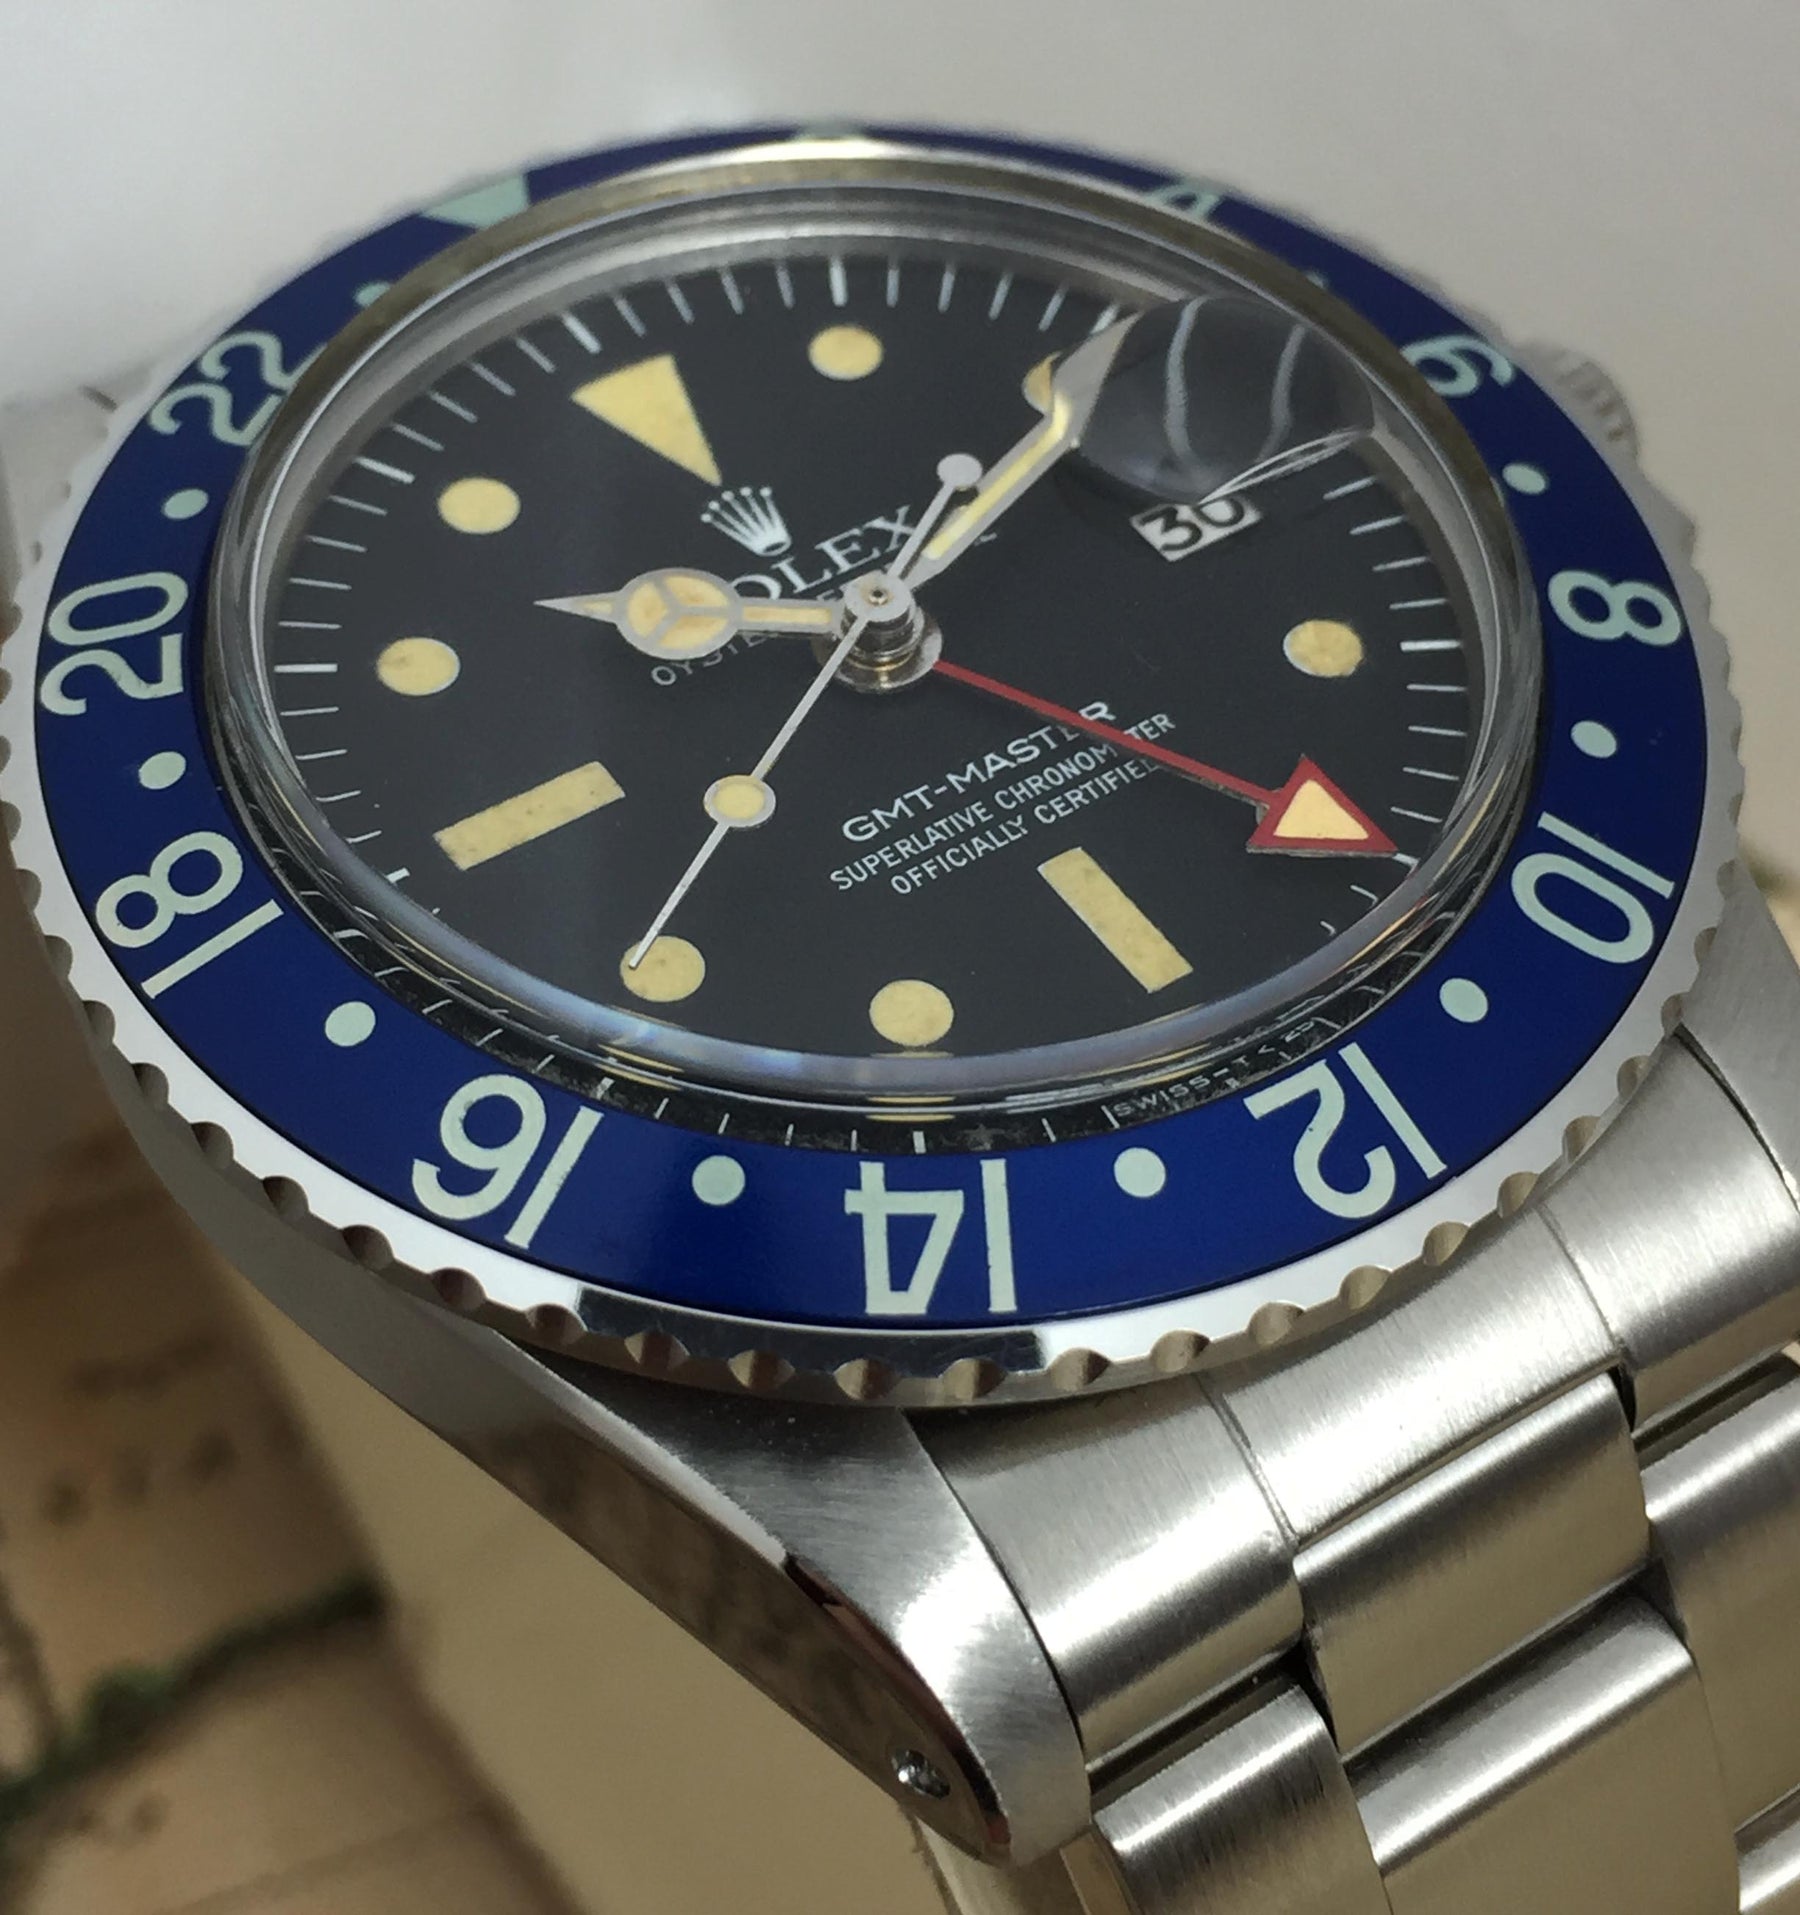 Rolex GMT Master Radial Ref. 1675 Year 1978 (Full Set) - Price on Request